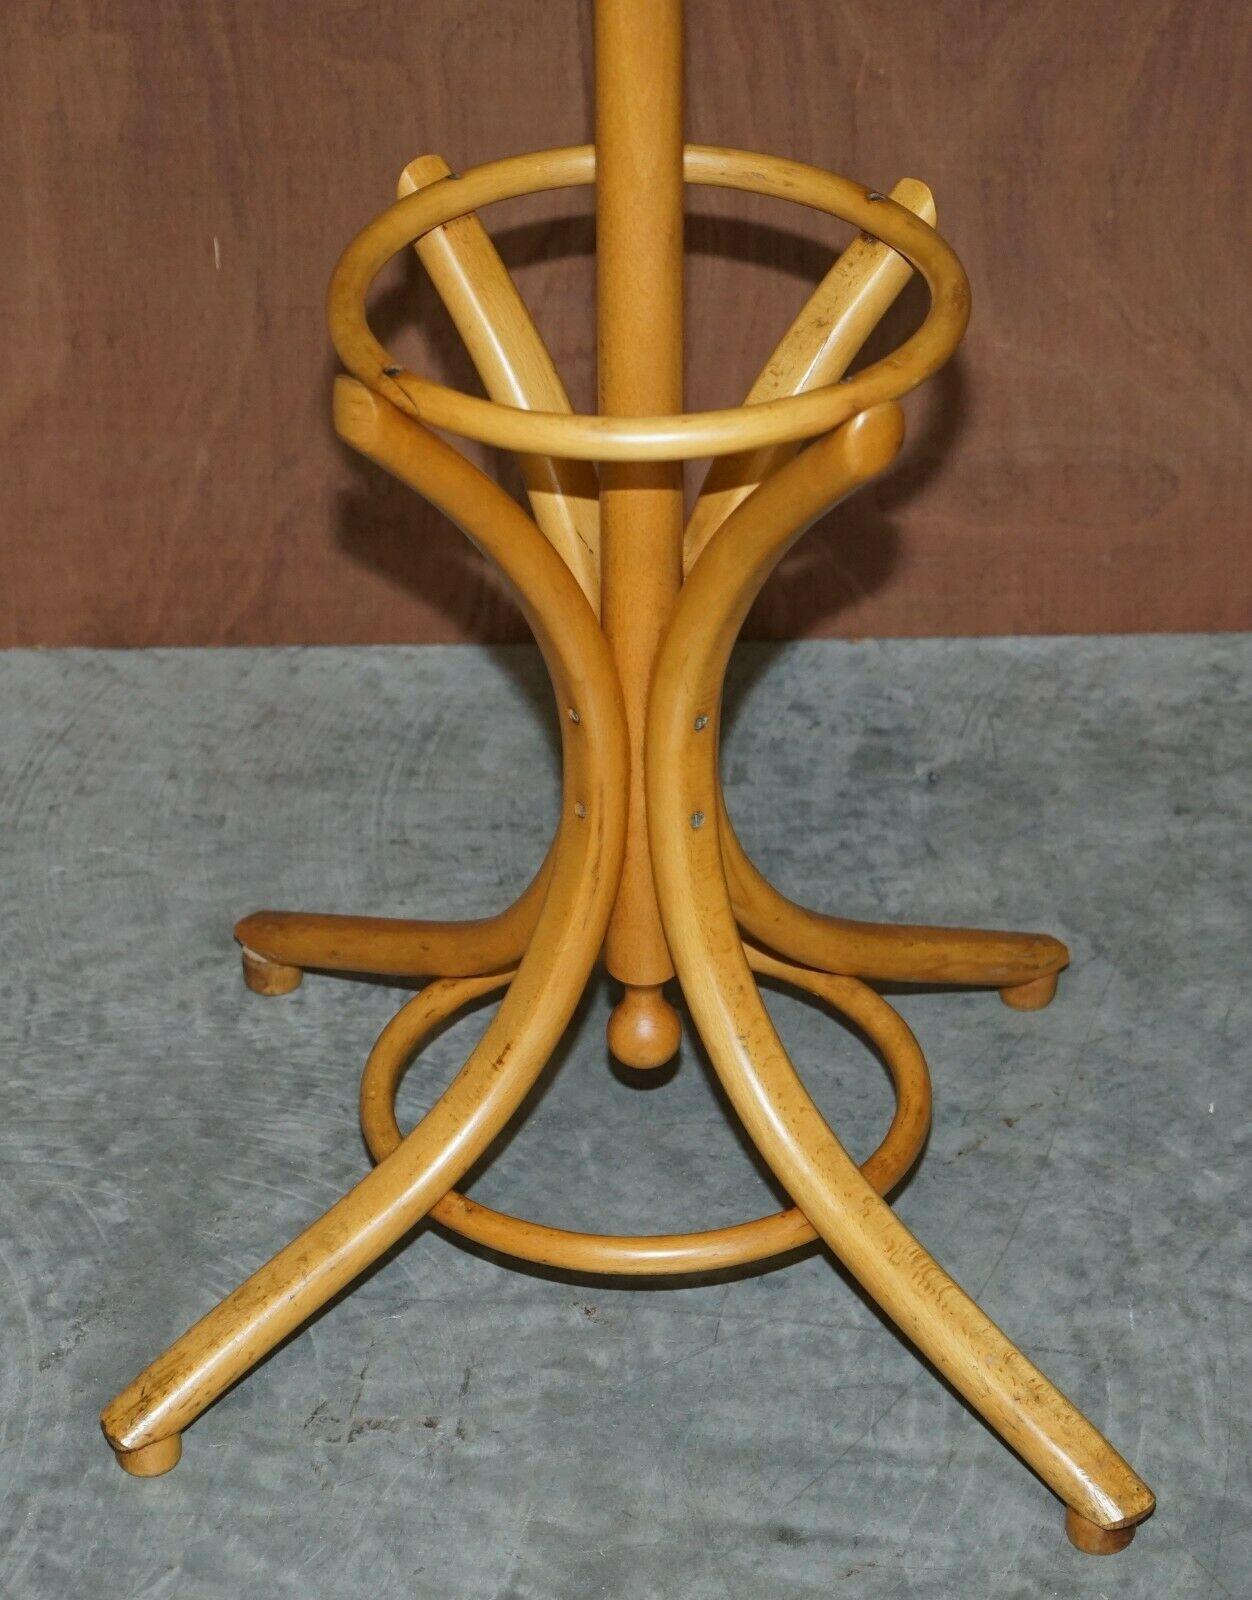 Hand-Crafted Lovely Beech Wood Very Tall Thonet Bentwood Coat Hat & Scarf Rack or Stand